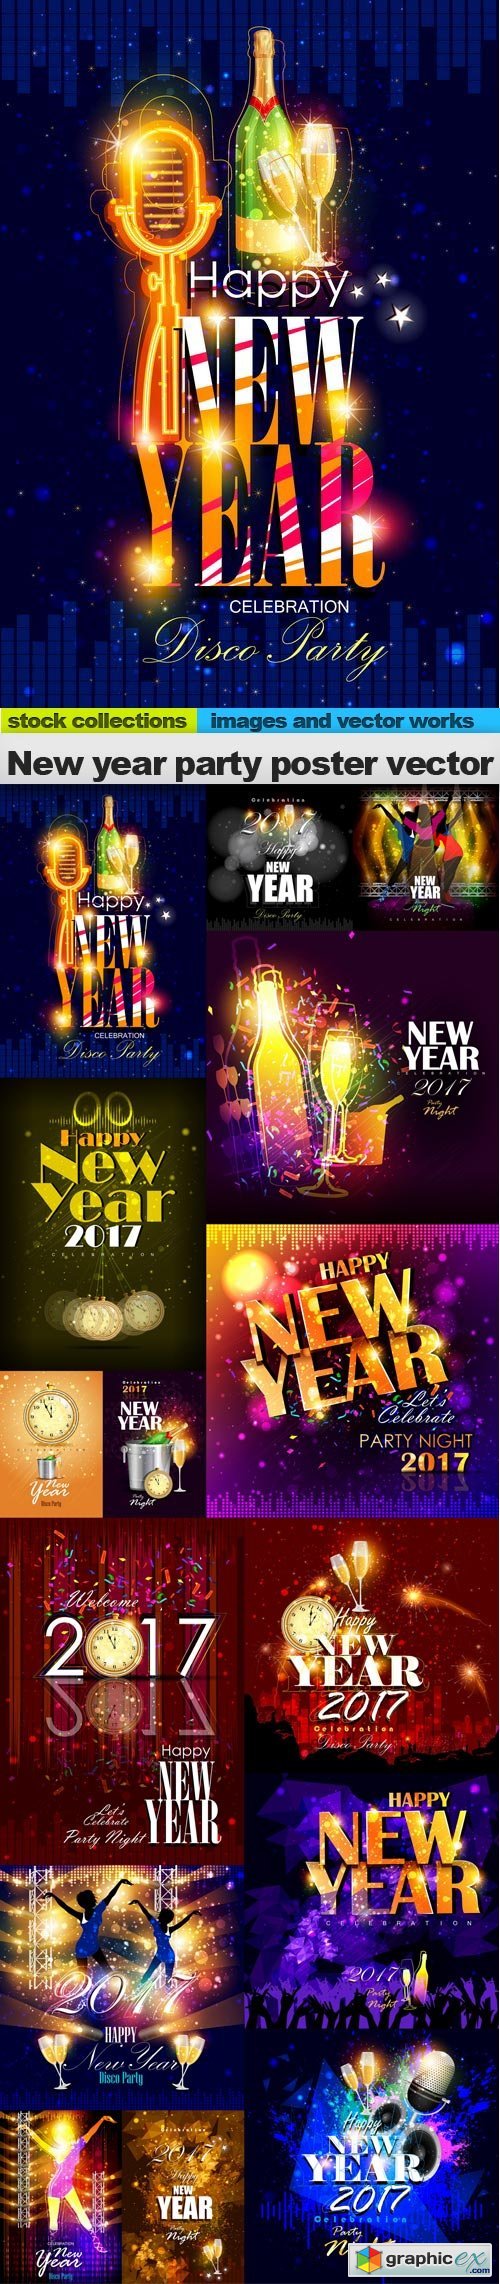 New year party poster vector, 15 x EPS